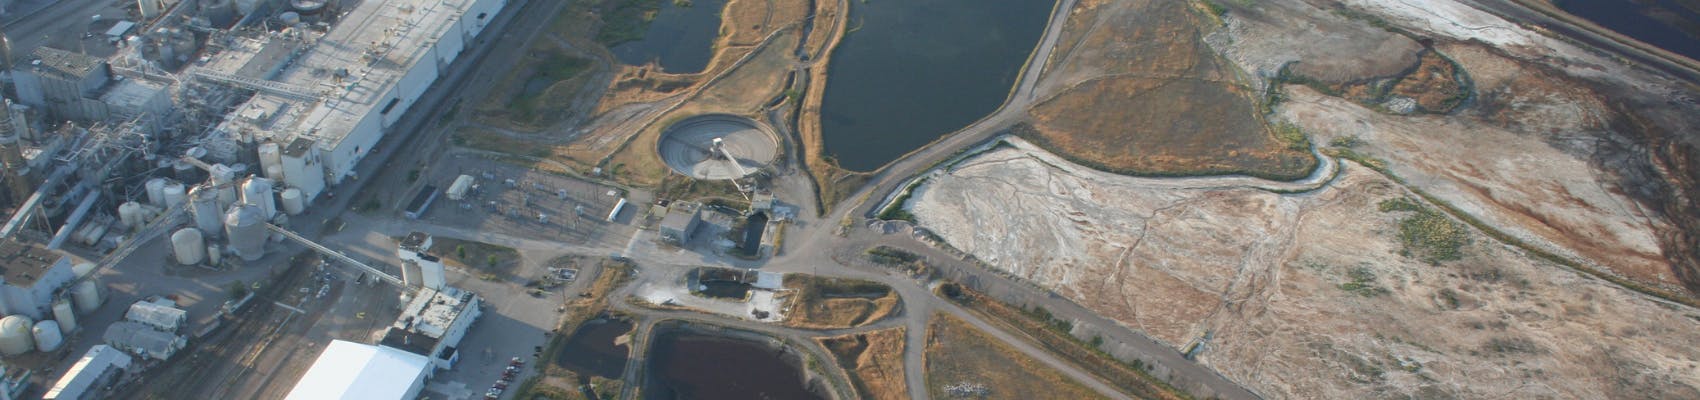 Aerial view of Smurfit Stone site